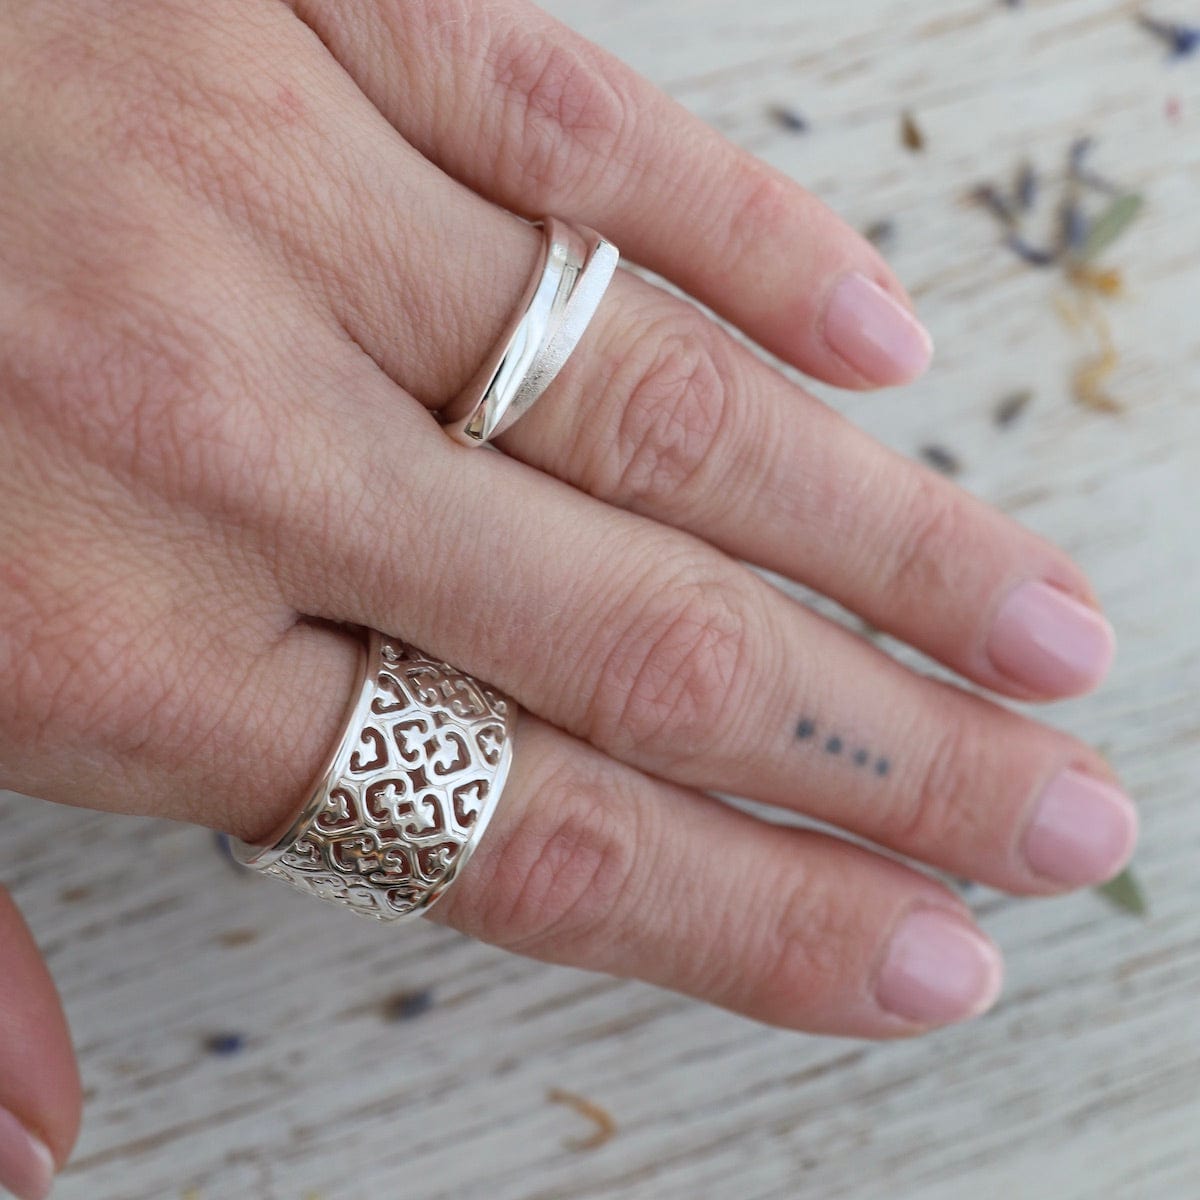 RNG Wide Silver Filigree & Heart Ring - Adjustable